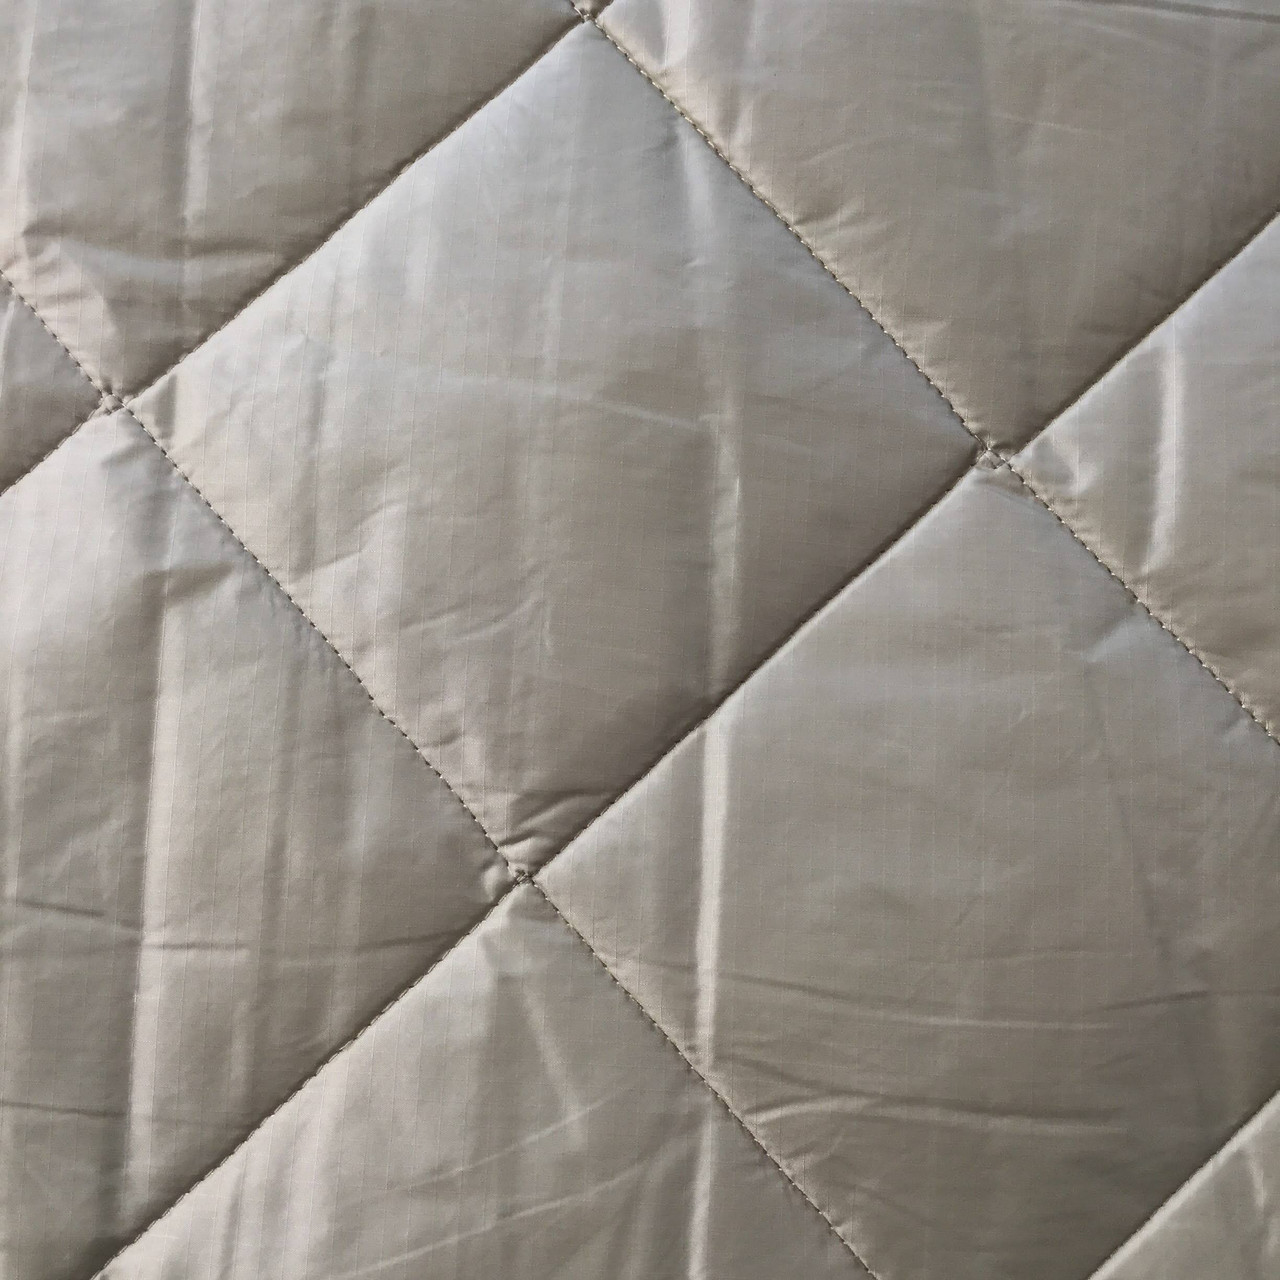 Pre-Quilted Fabric: Themes and Designs to Choose From